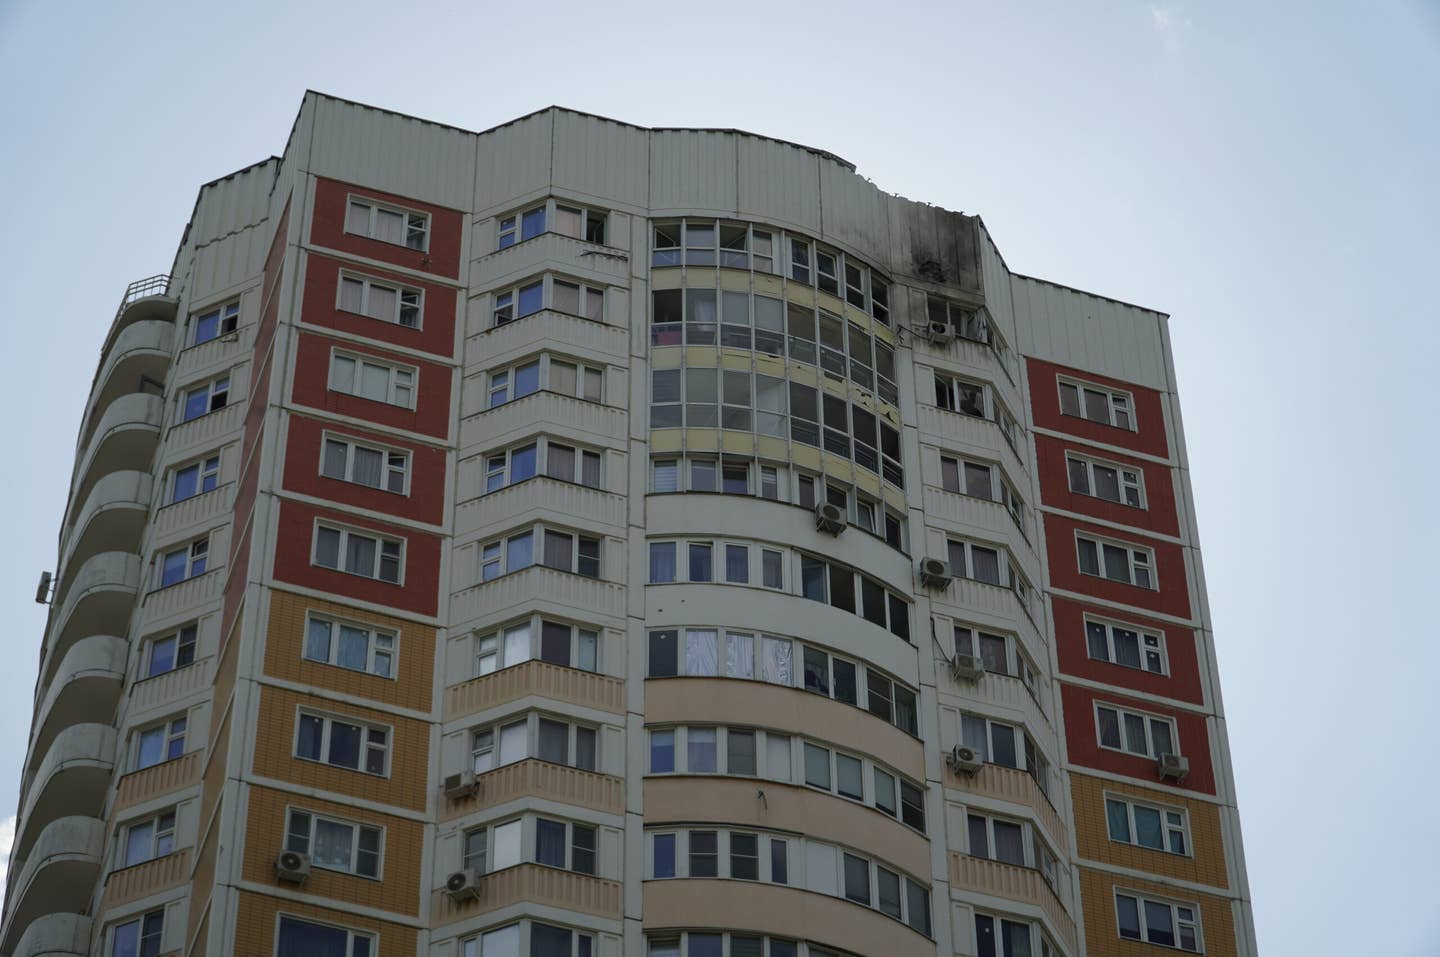 A view of damage to the top floor of an apartment building after the drone attack in Moscow on May 30, 2023. <em>Photo by Evgenii Bugubaev/Anadolu Agency via Getty Images</em>